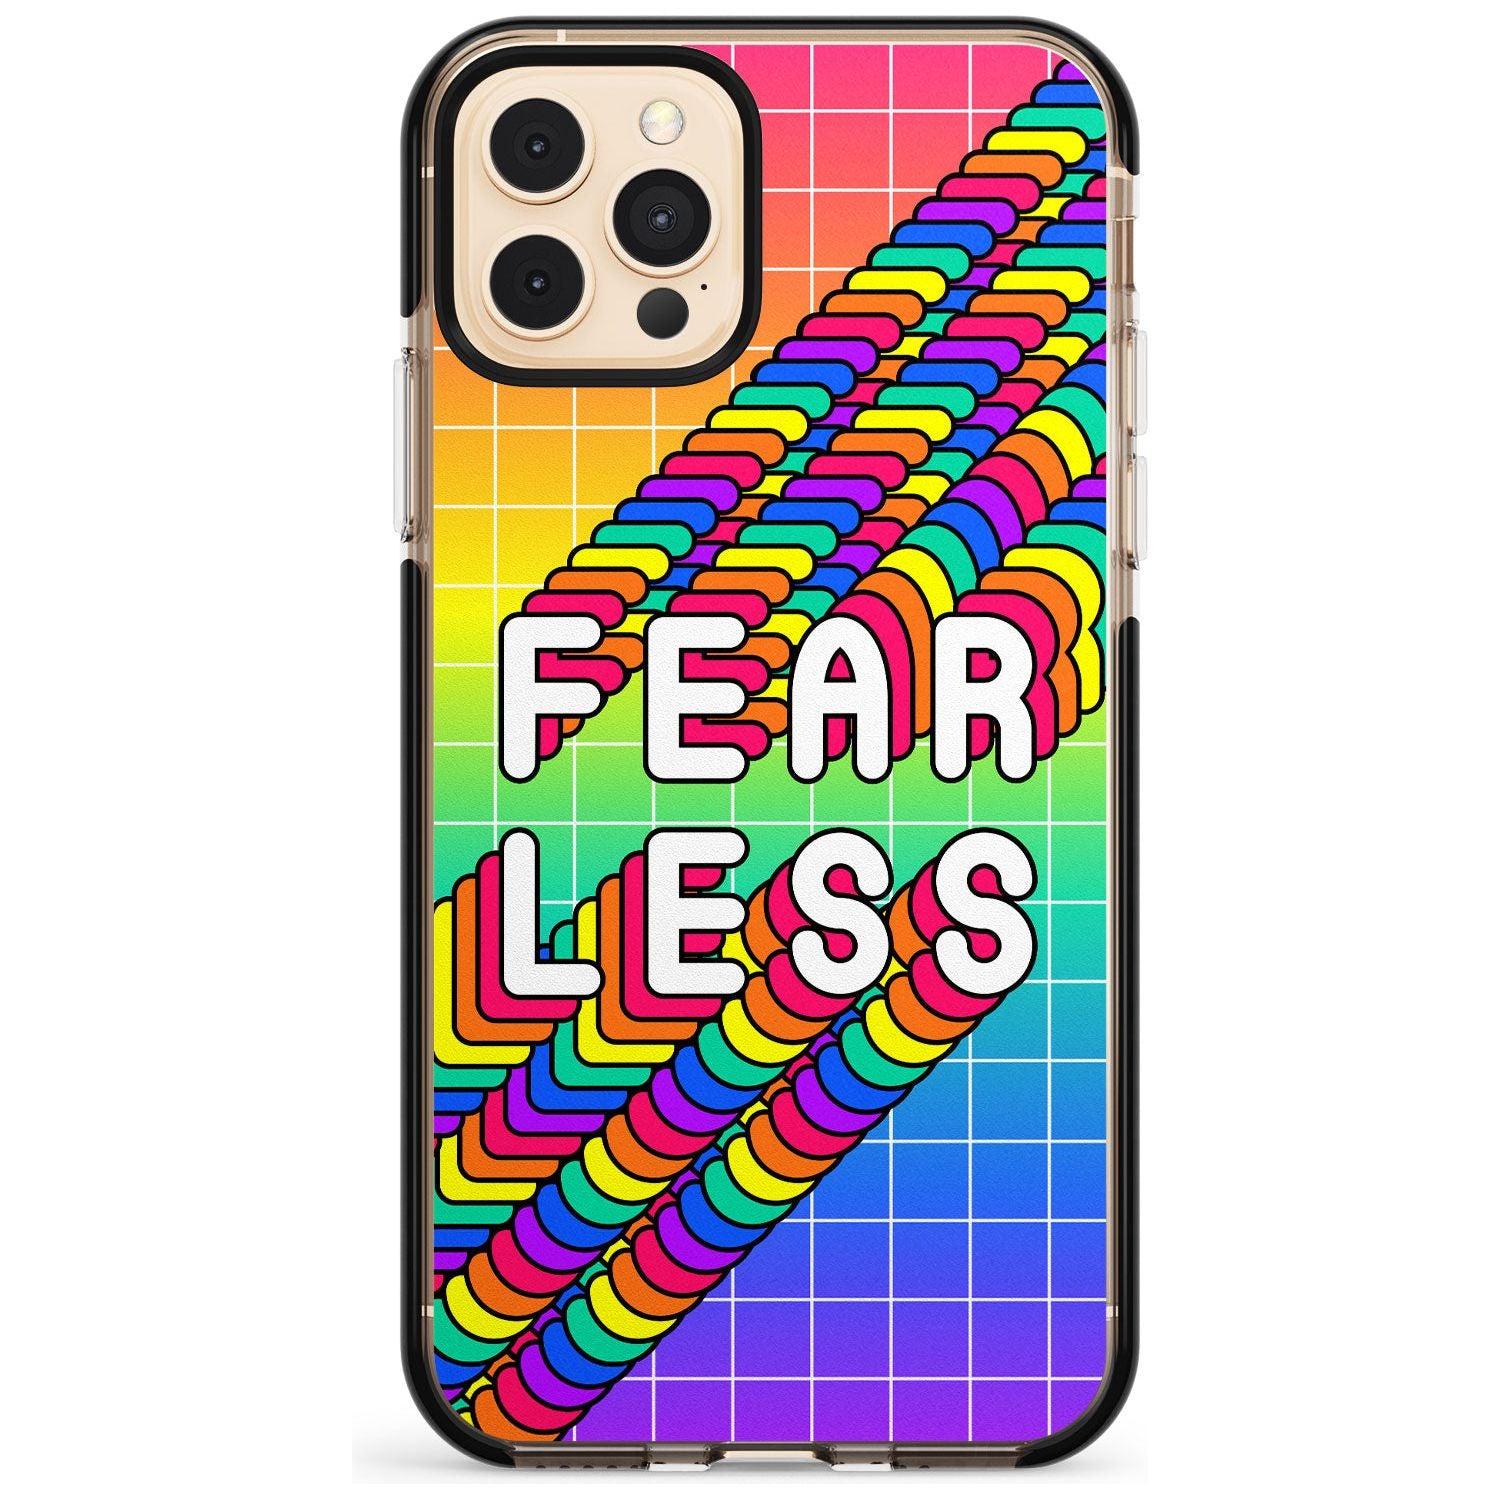 Fearless Black Impact Phone Case for iPhone 11